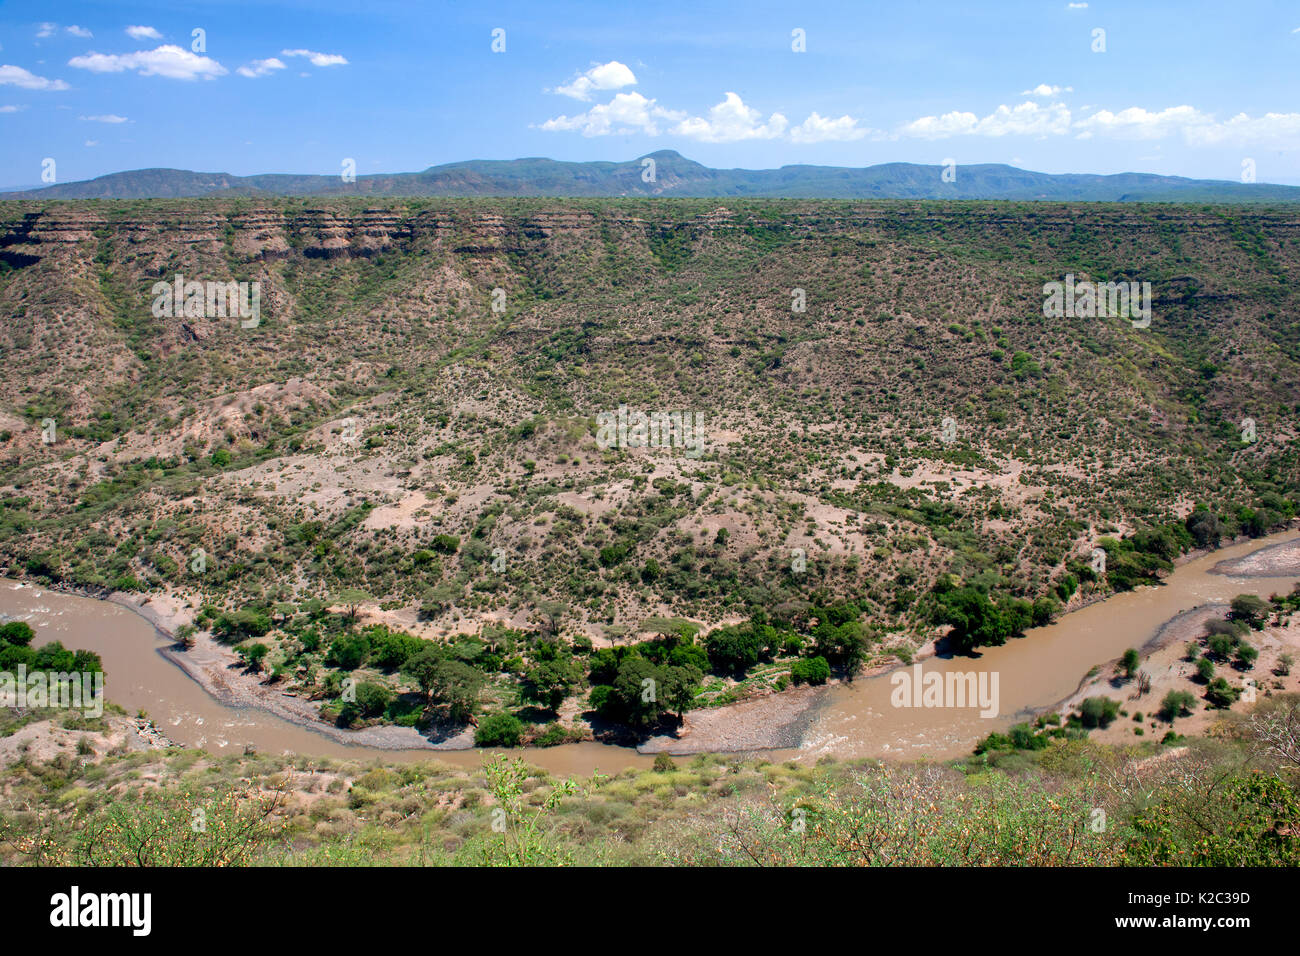 Awash river and gorge, Awash National Park, Afar Region, Great Rift Valley, Ethiopia, Africa, March 2009. Stock Photo